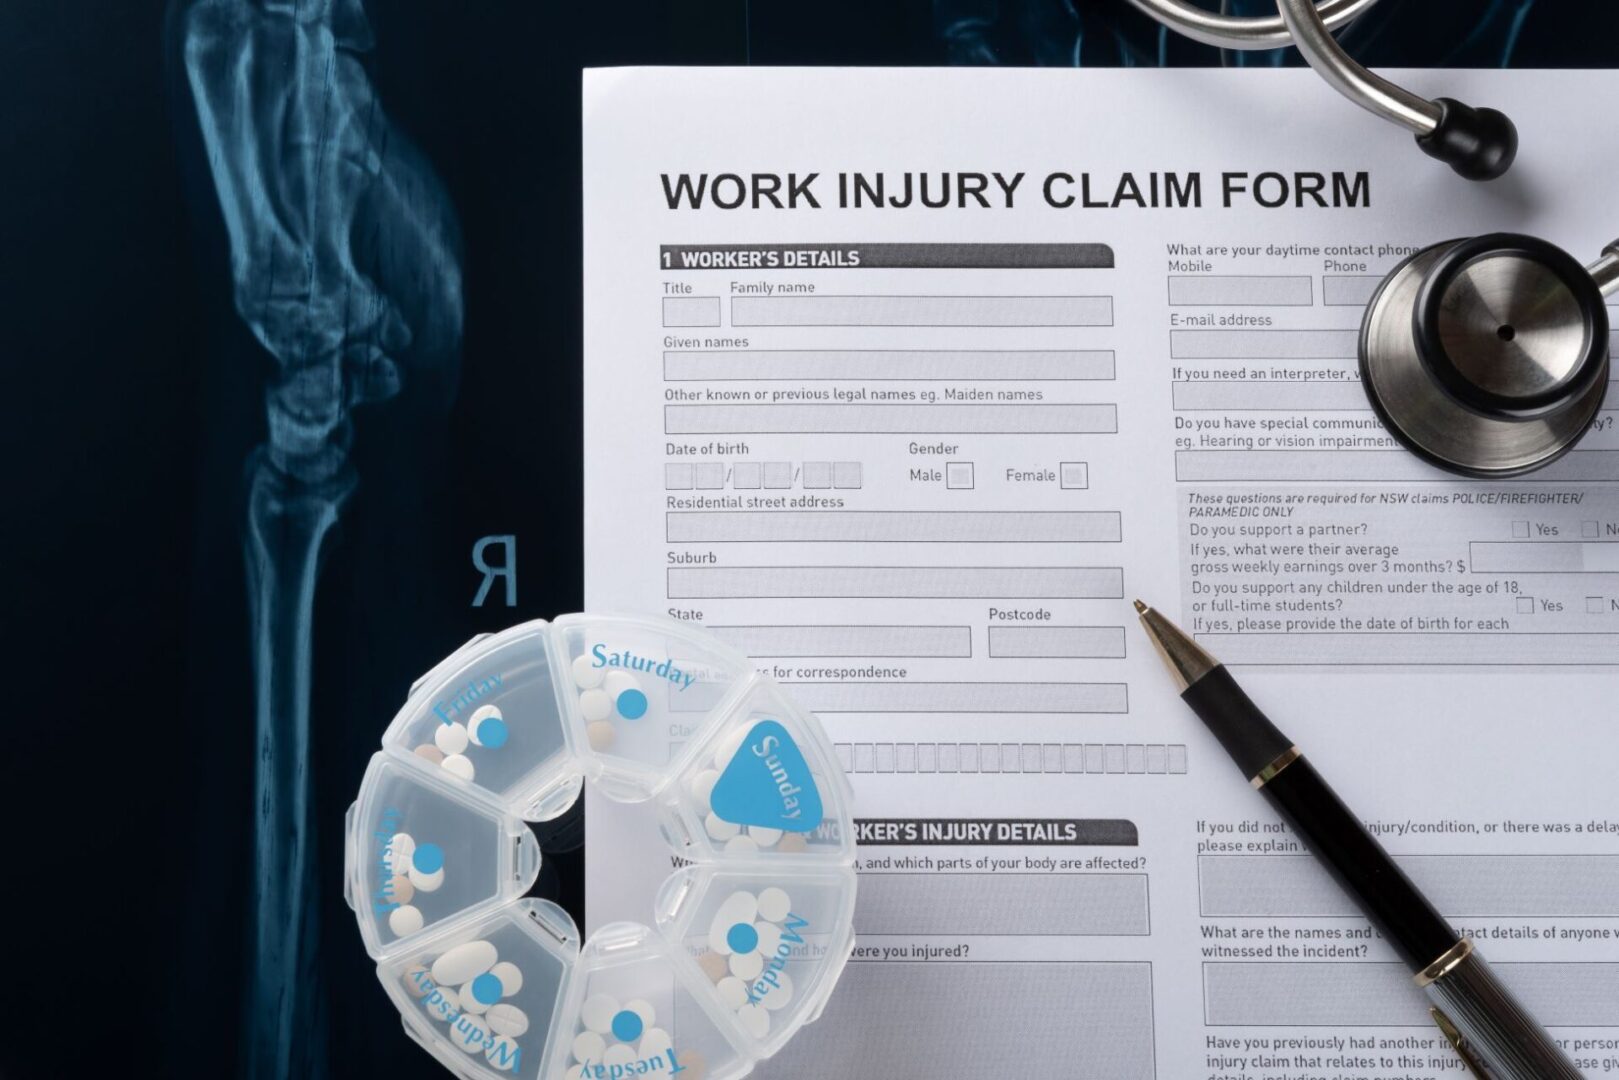 A work injury claim form and medical equipment.